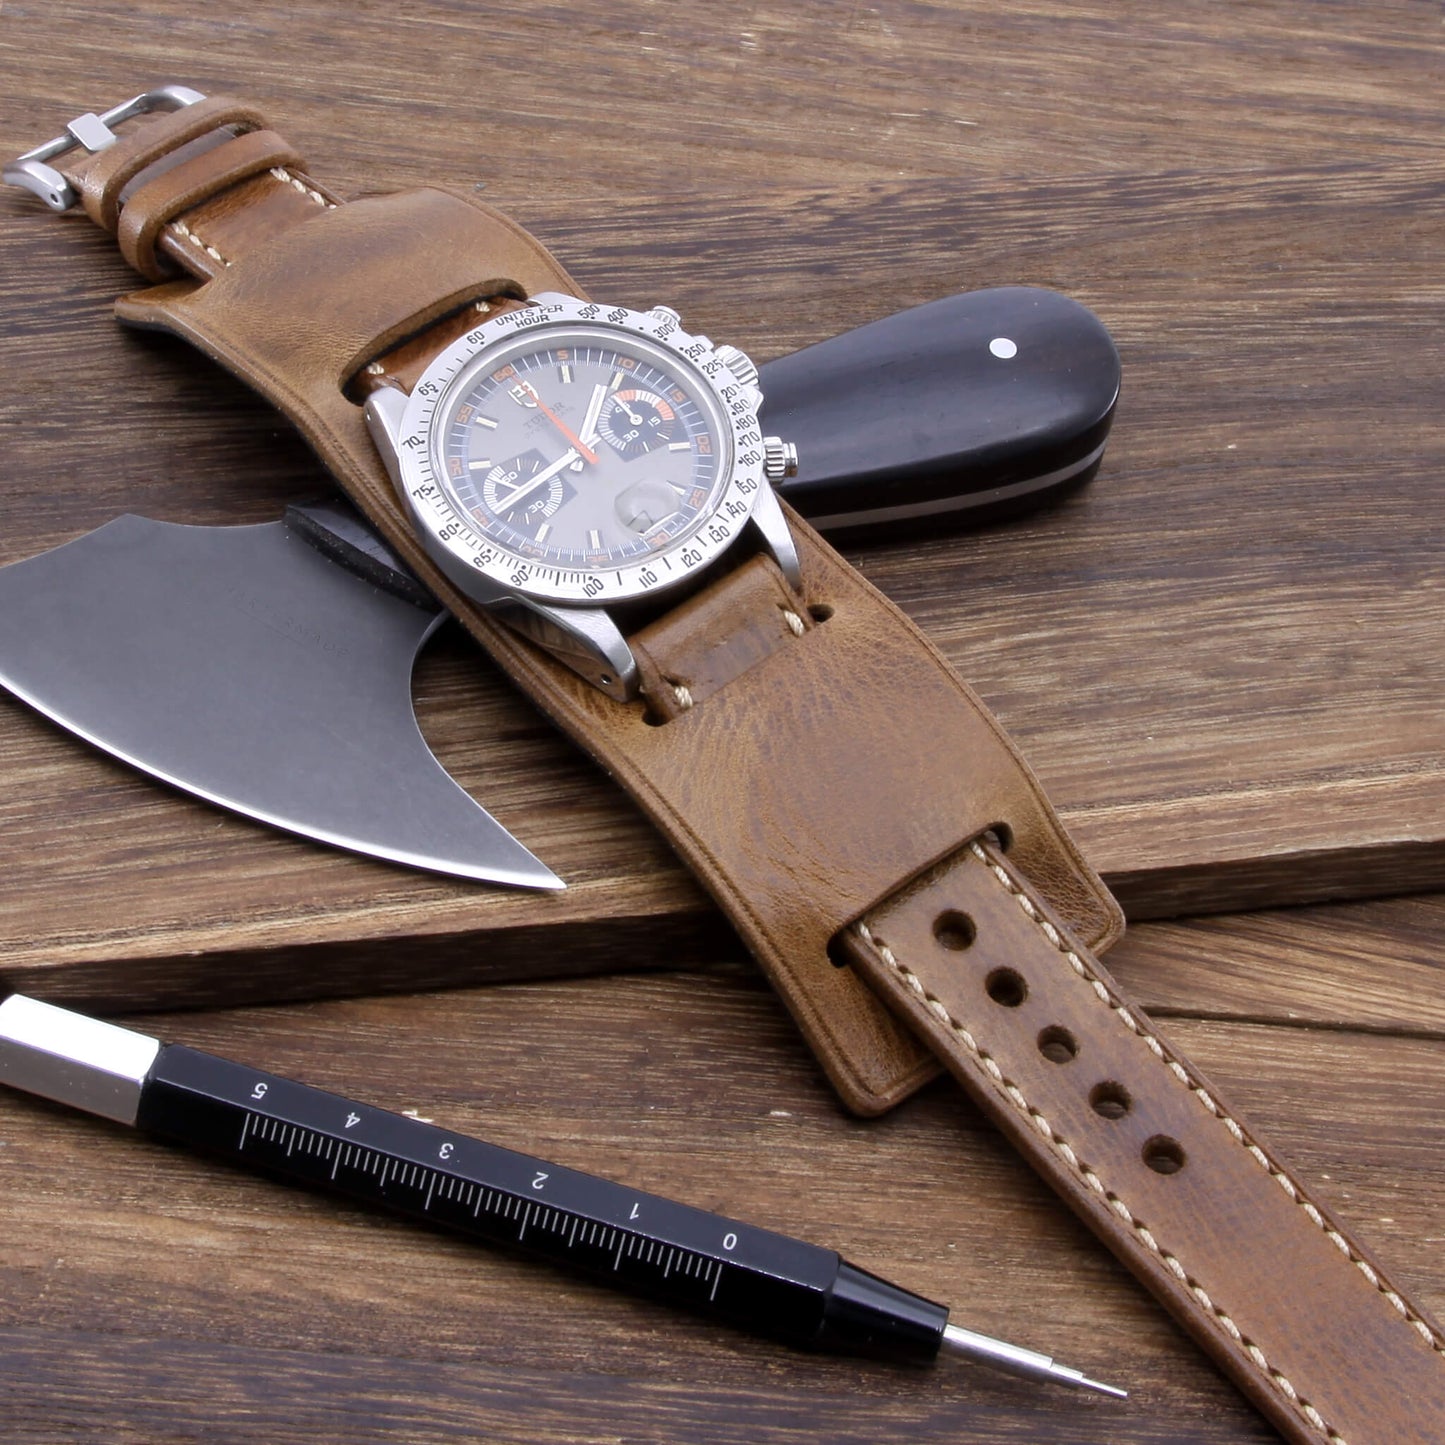 Leather bund pad in Newman Style Military 102 camouflage (timepiece for illustrative purposes only) | Stitch-less construction, made with full grain Italian veg-tanned leather